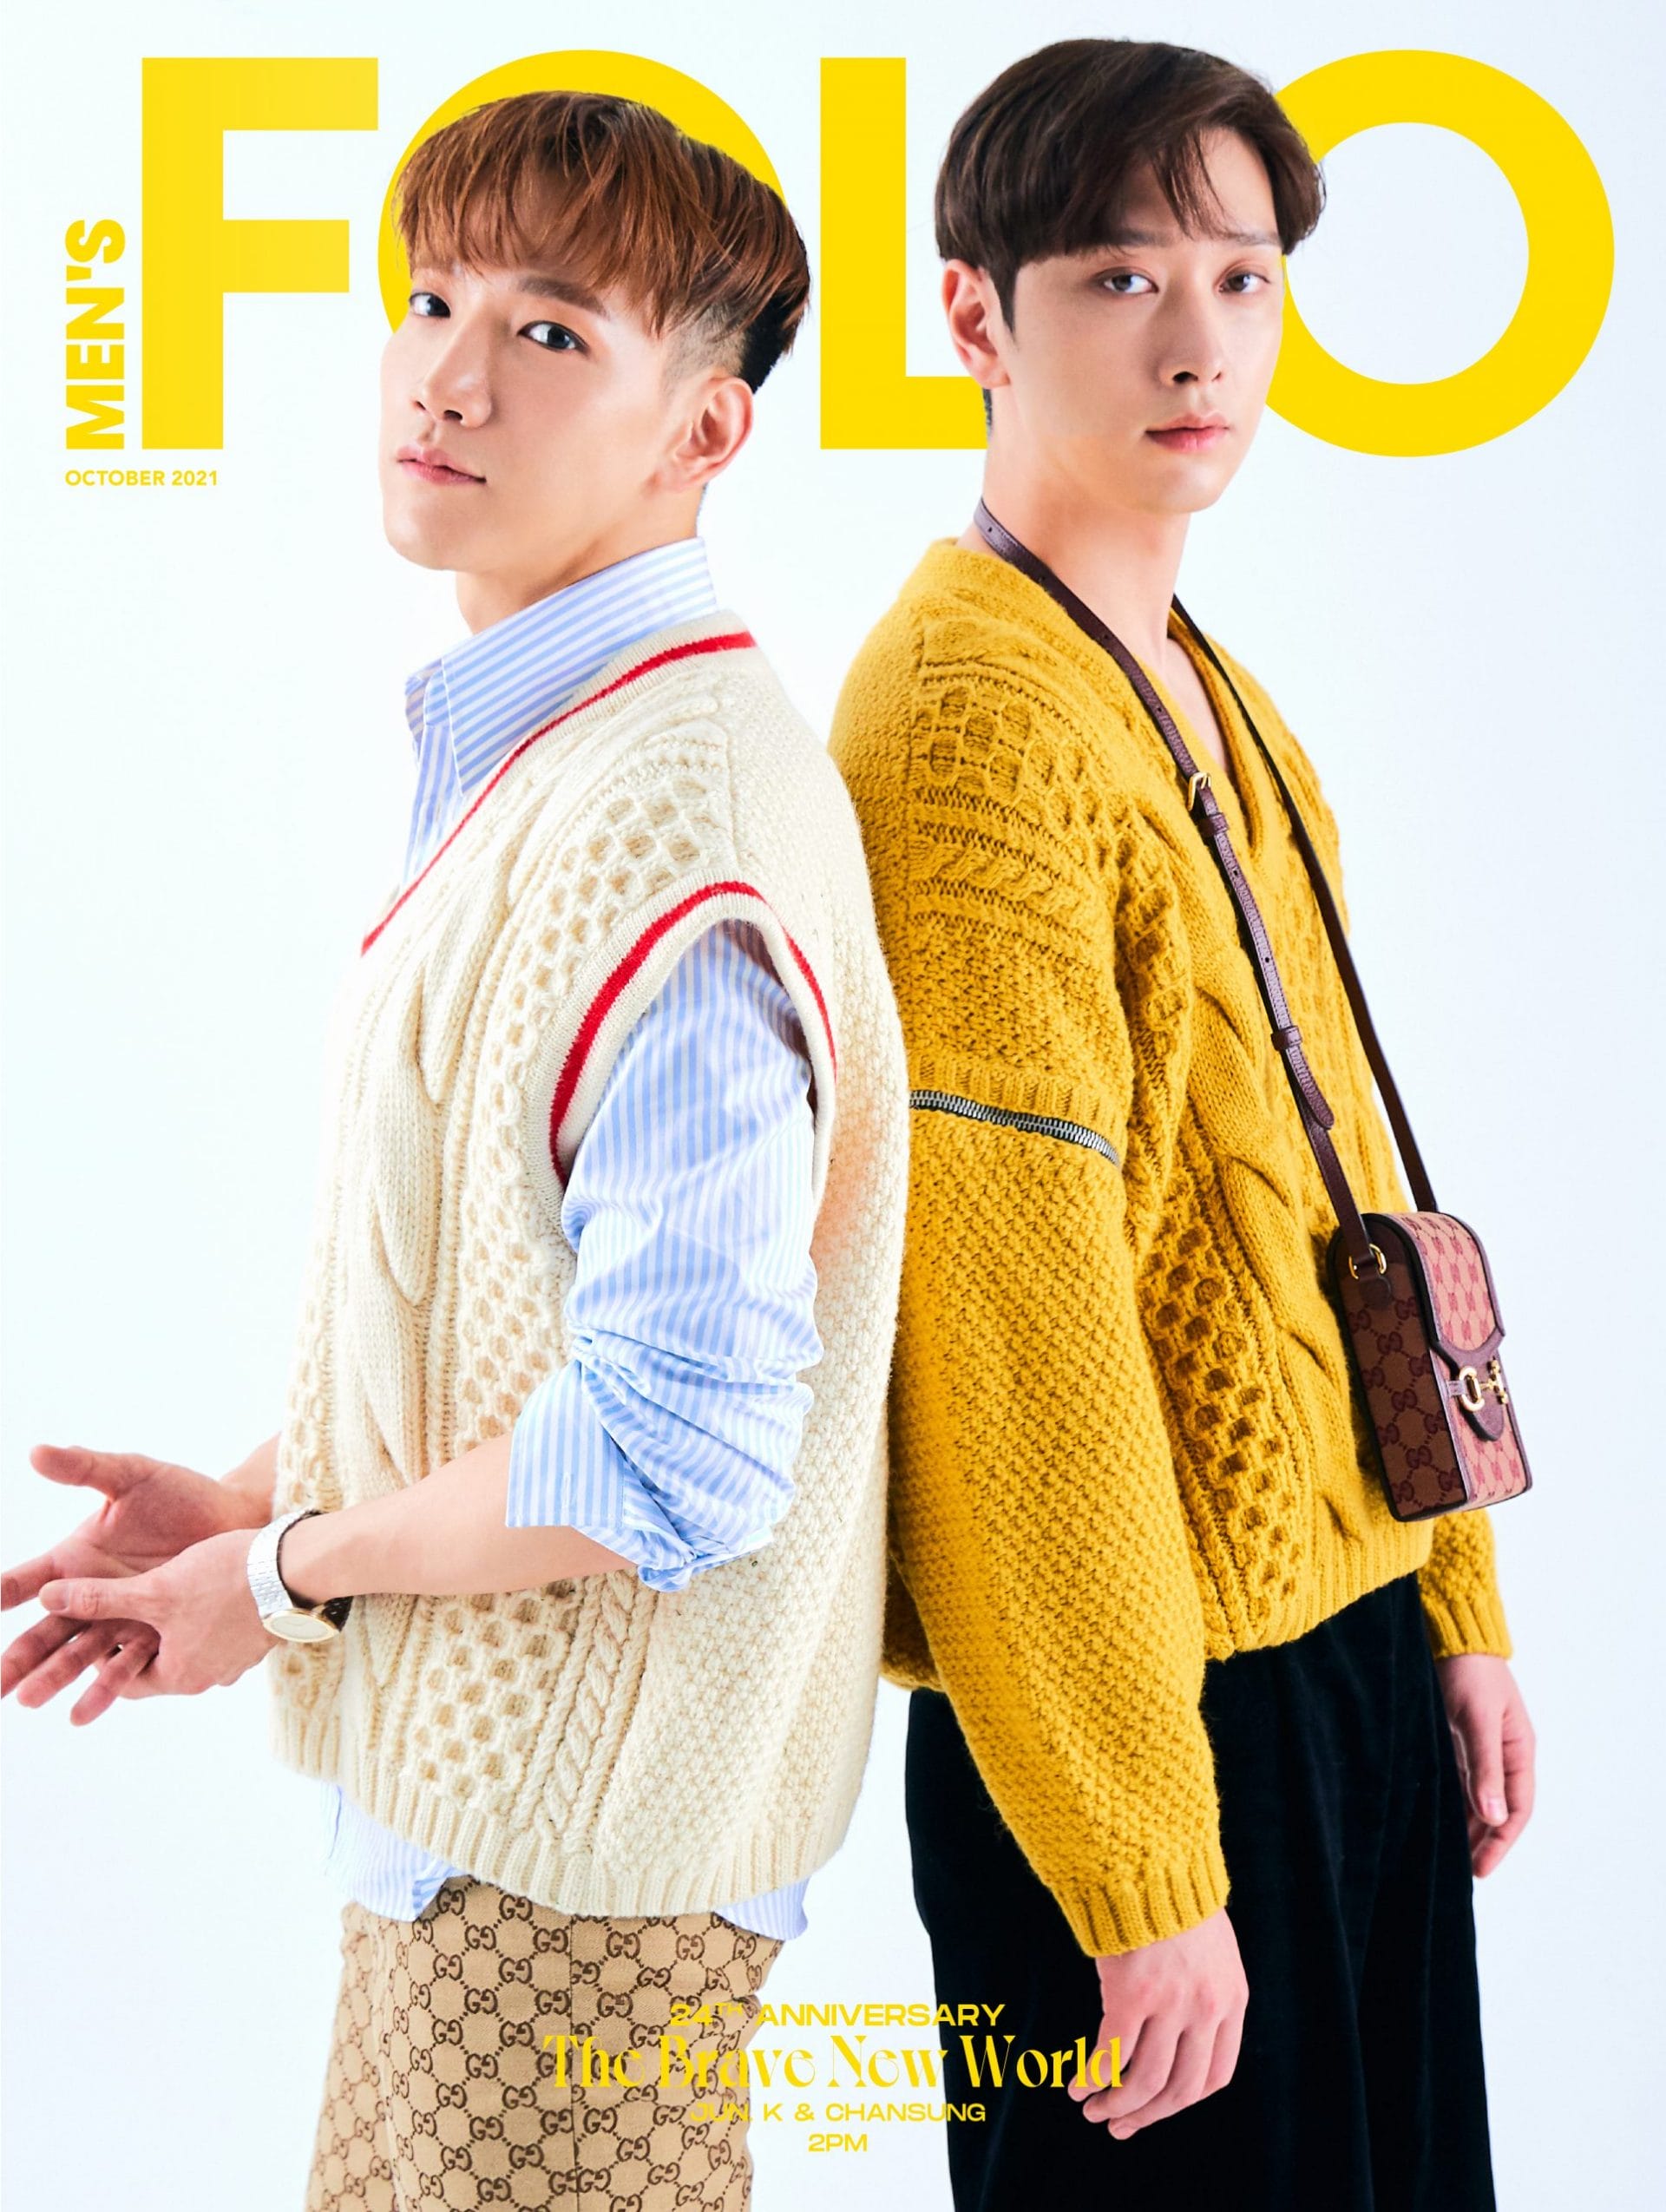 Our October 2021 Cover Stars JUN. K and CHANSUNG of 2PM On Their Comeback